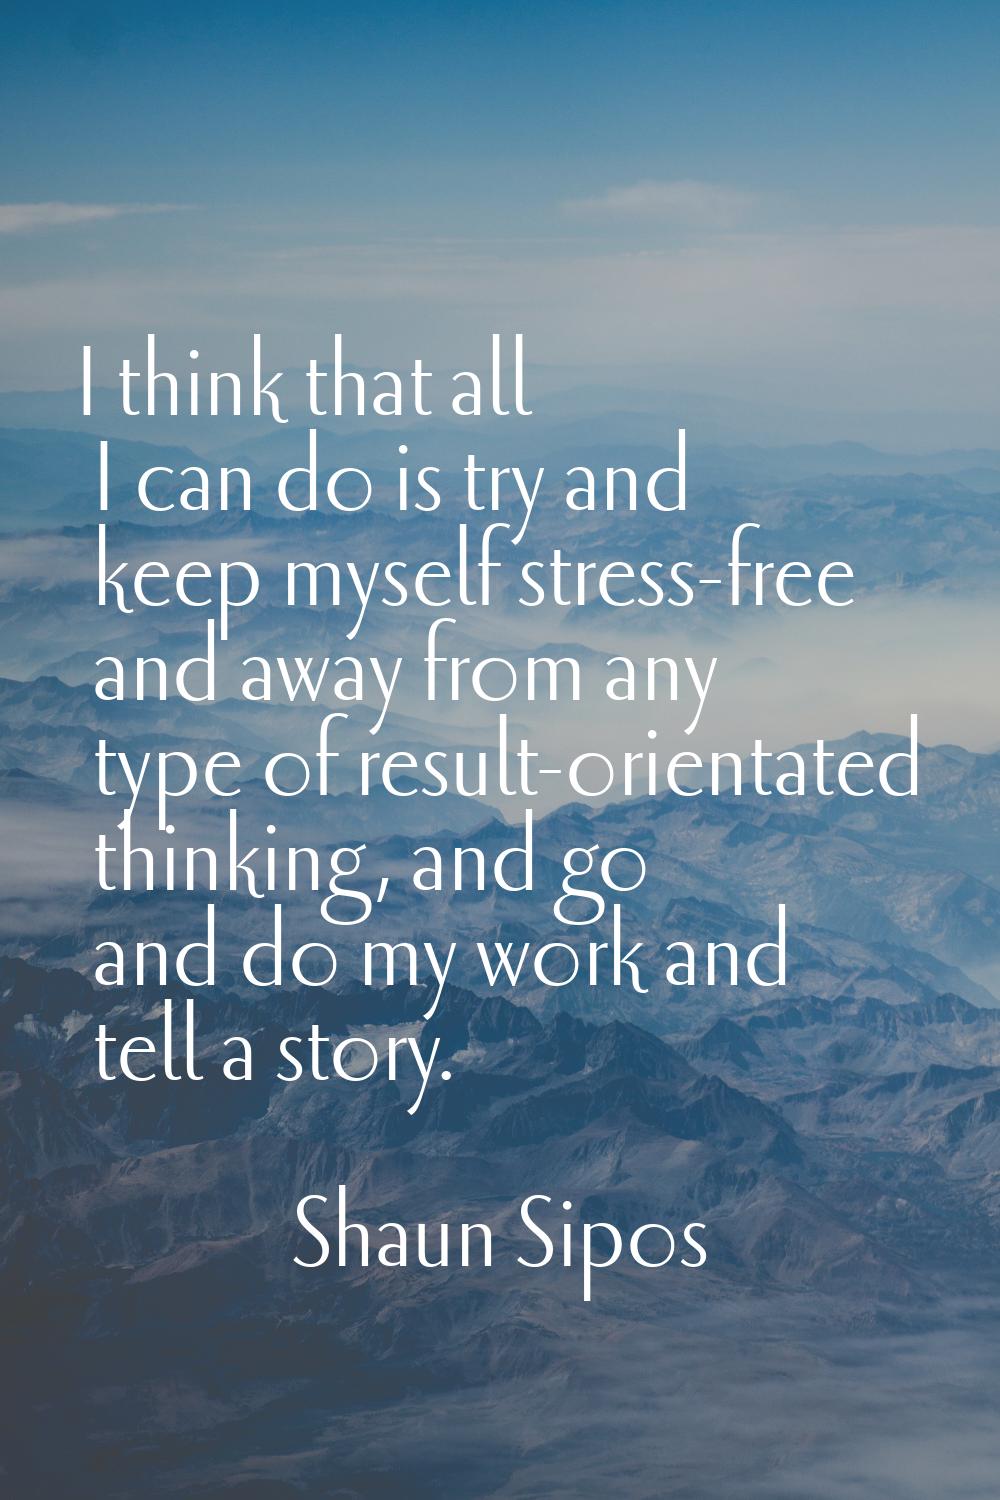 I think that all I can do is try and keep myself stress-free and away from any type of result-orien